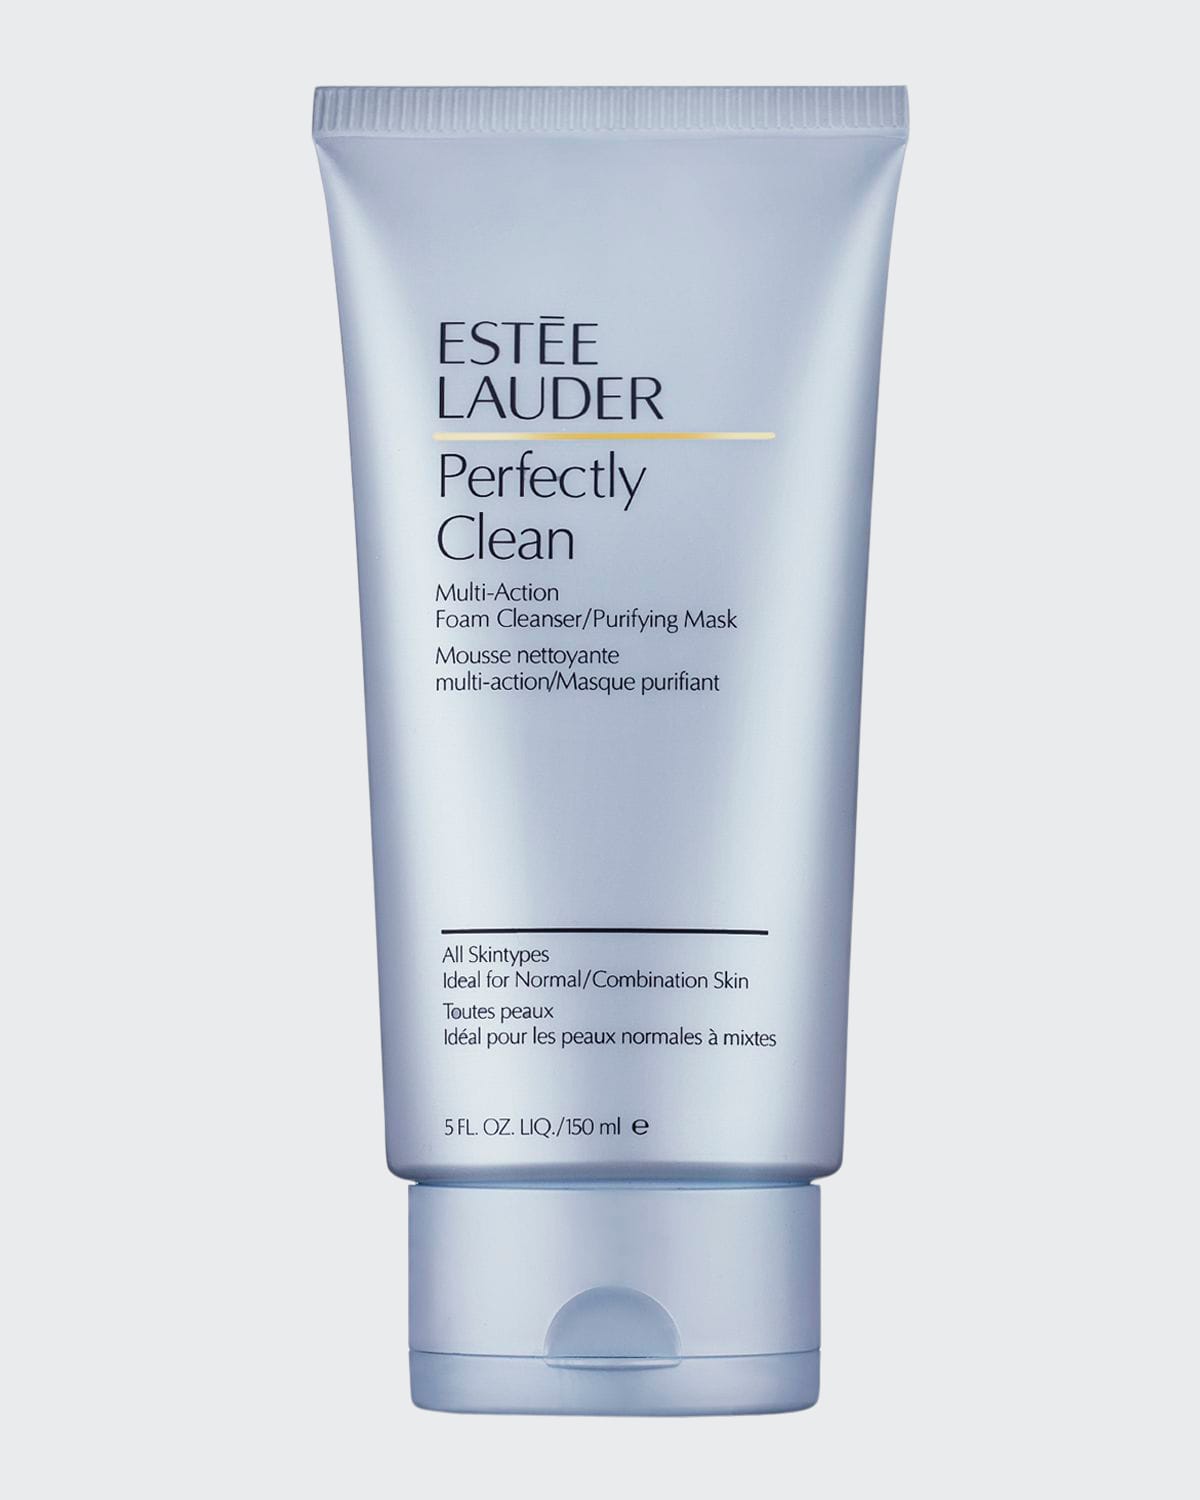 Perfectly Clean Foam Cleanser/Purifying Mask, 5.0 oz.